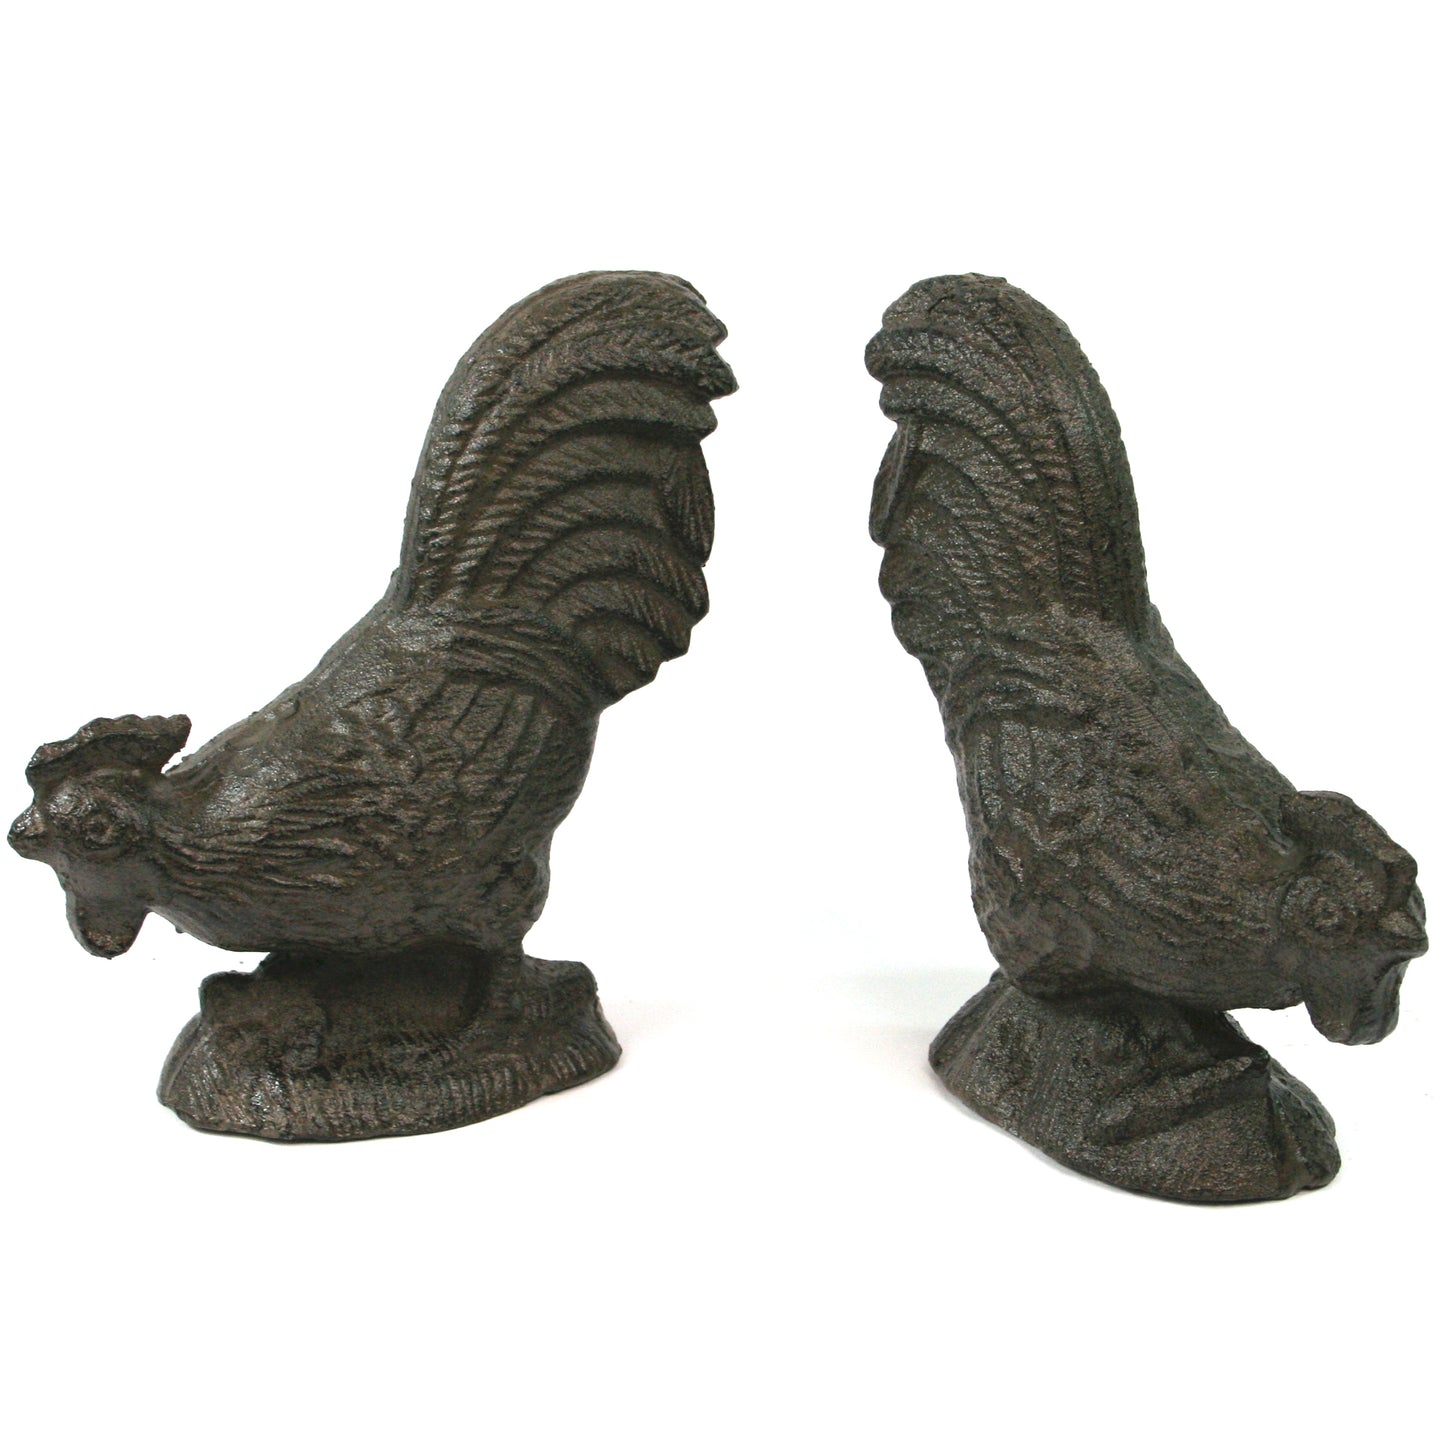 Chic Chicken Cast Iron Bookends - Durable and Stylish Home Decor